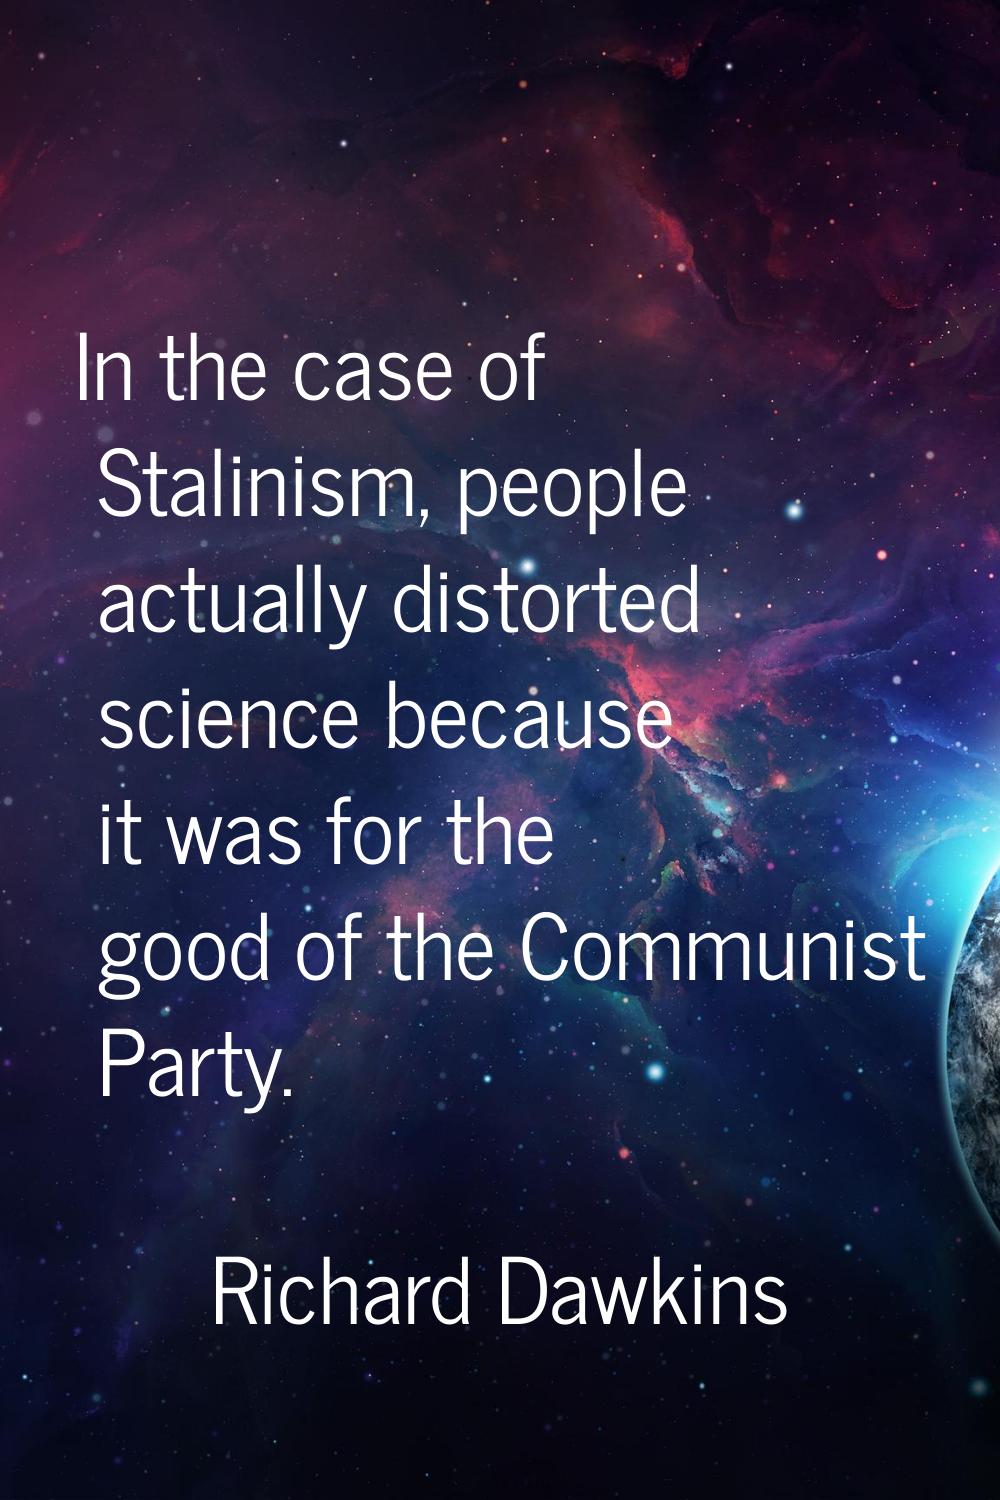 In the case of Stalinism, people actually distorted science because it was for the good of the Comm